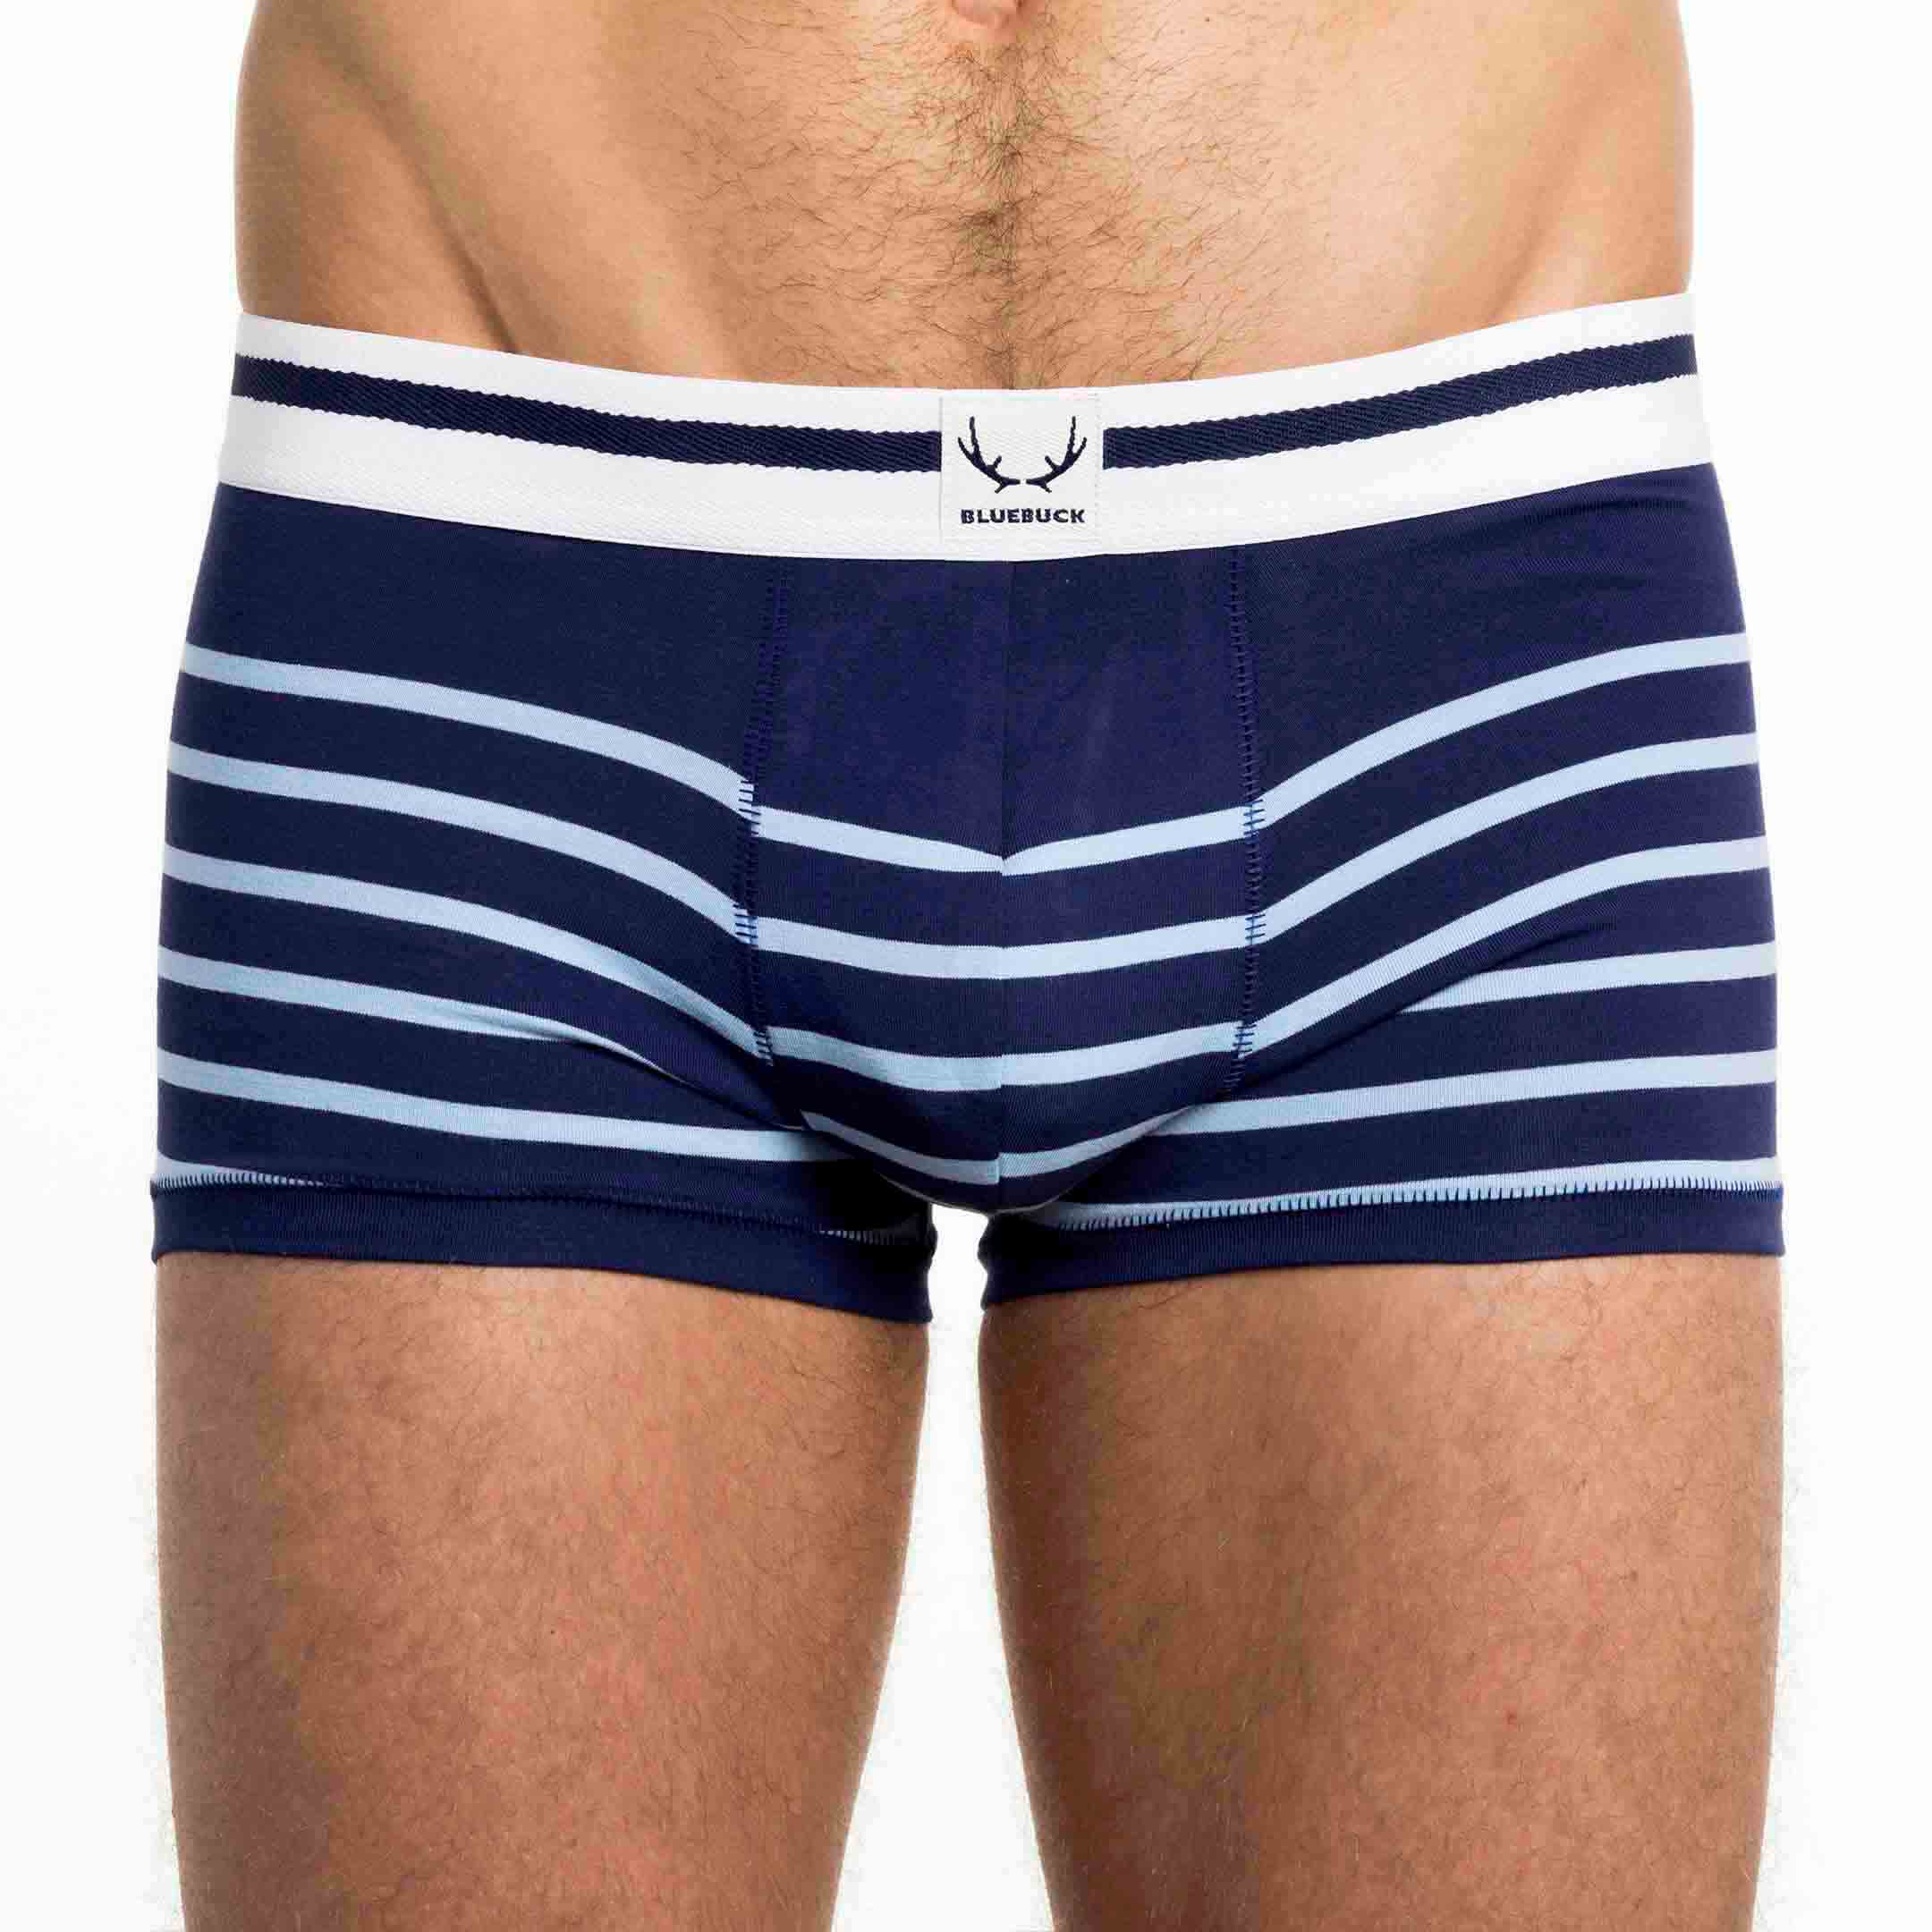 Blue and white striped boxer shorts made of organic cotton from Bluebuck